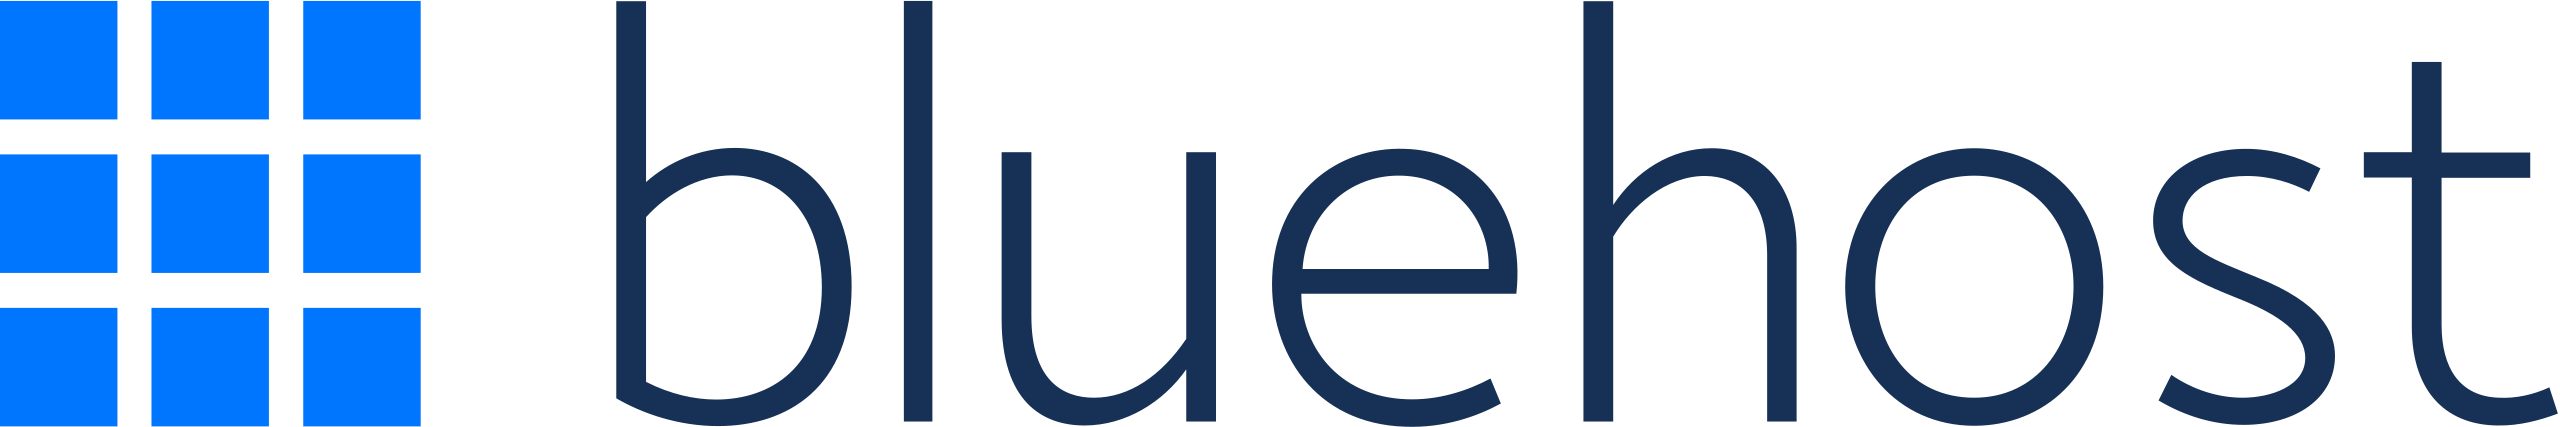 The official bluehost logo